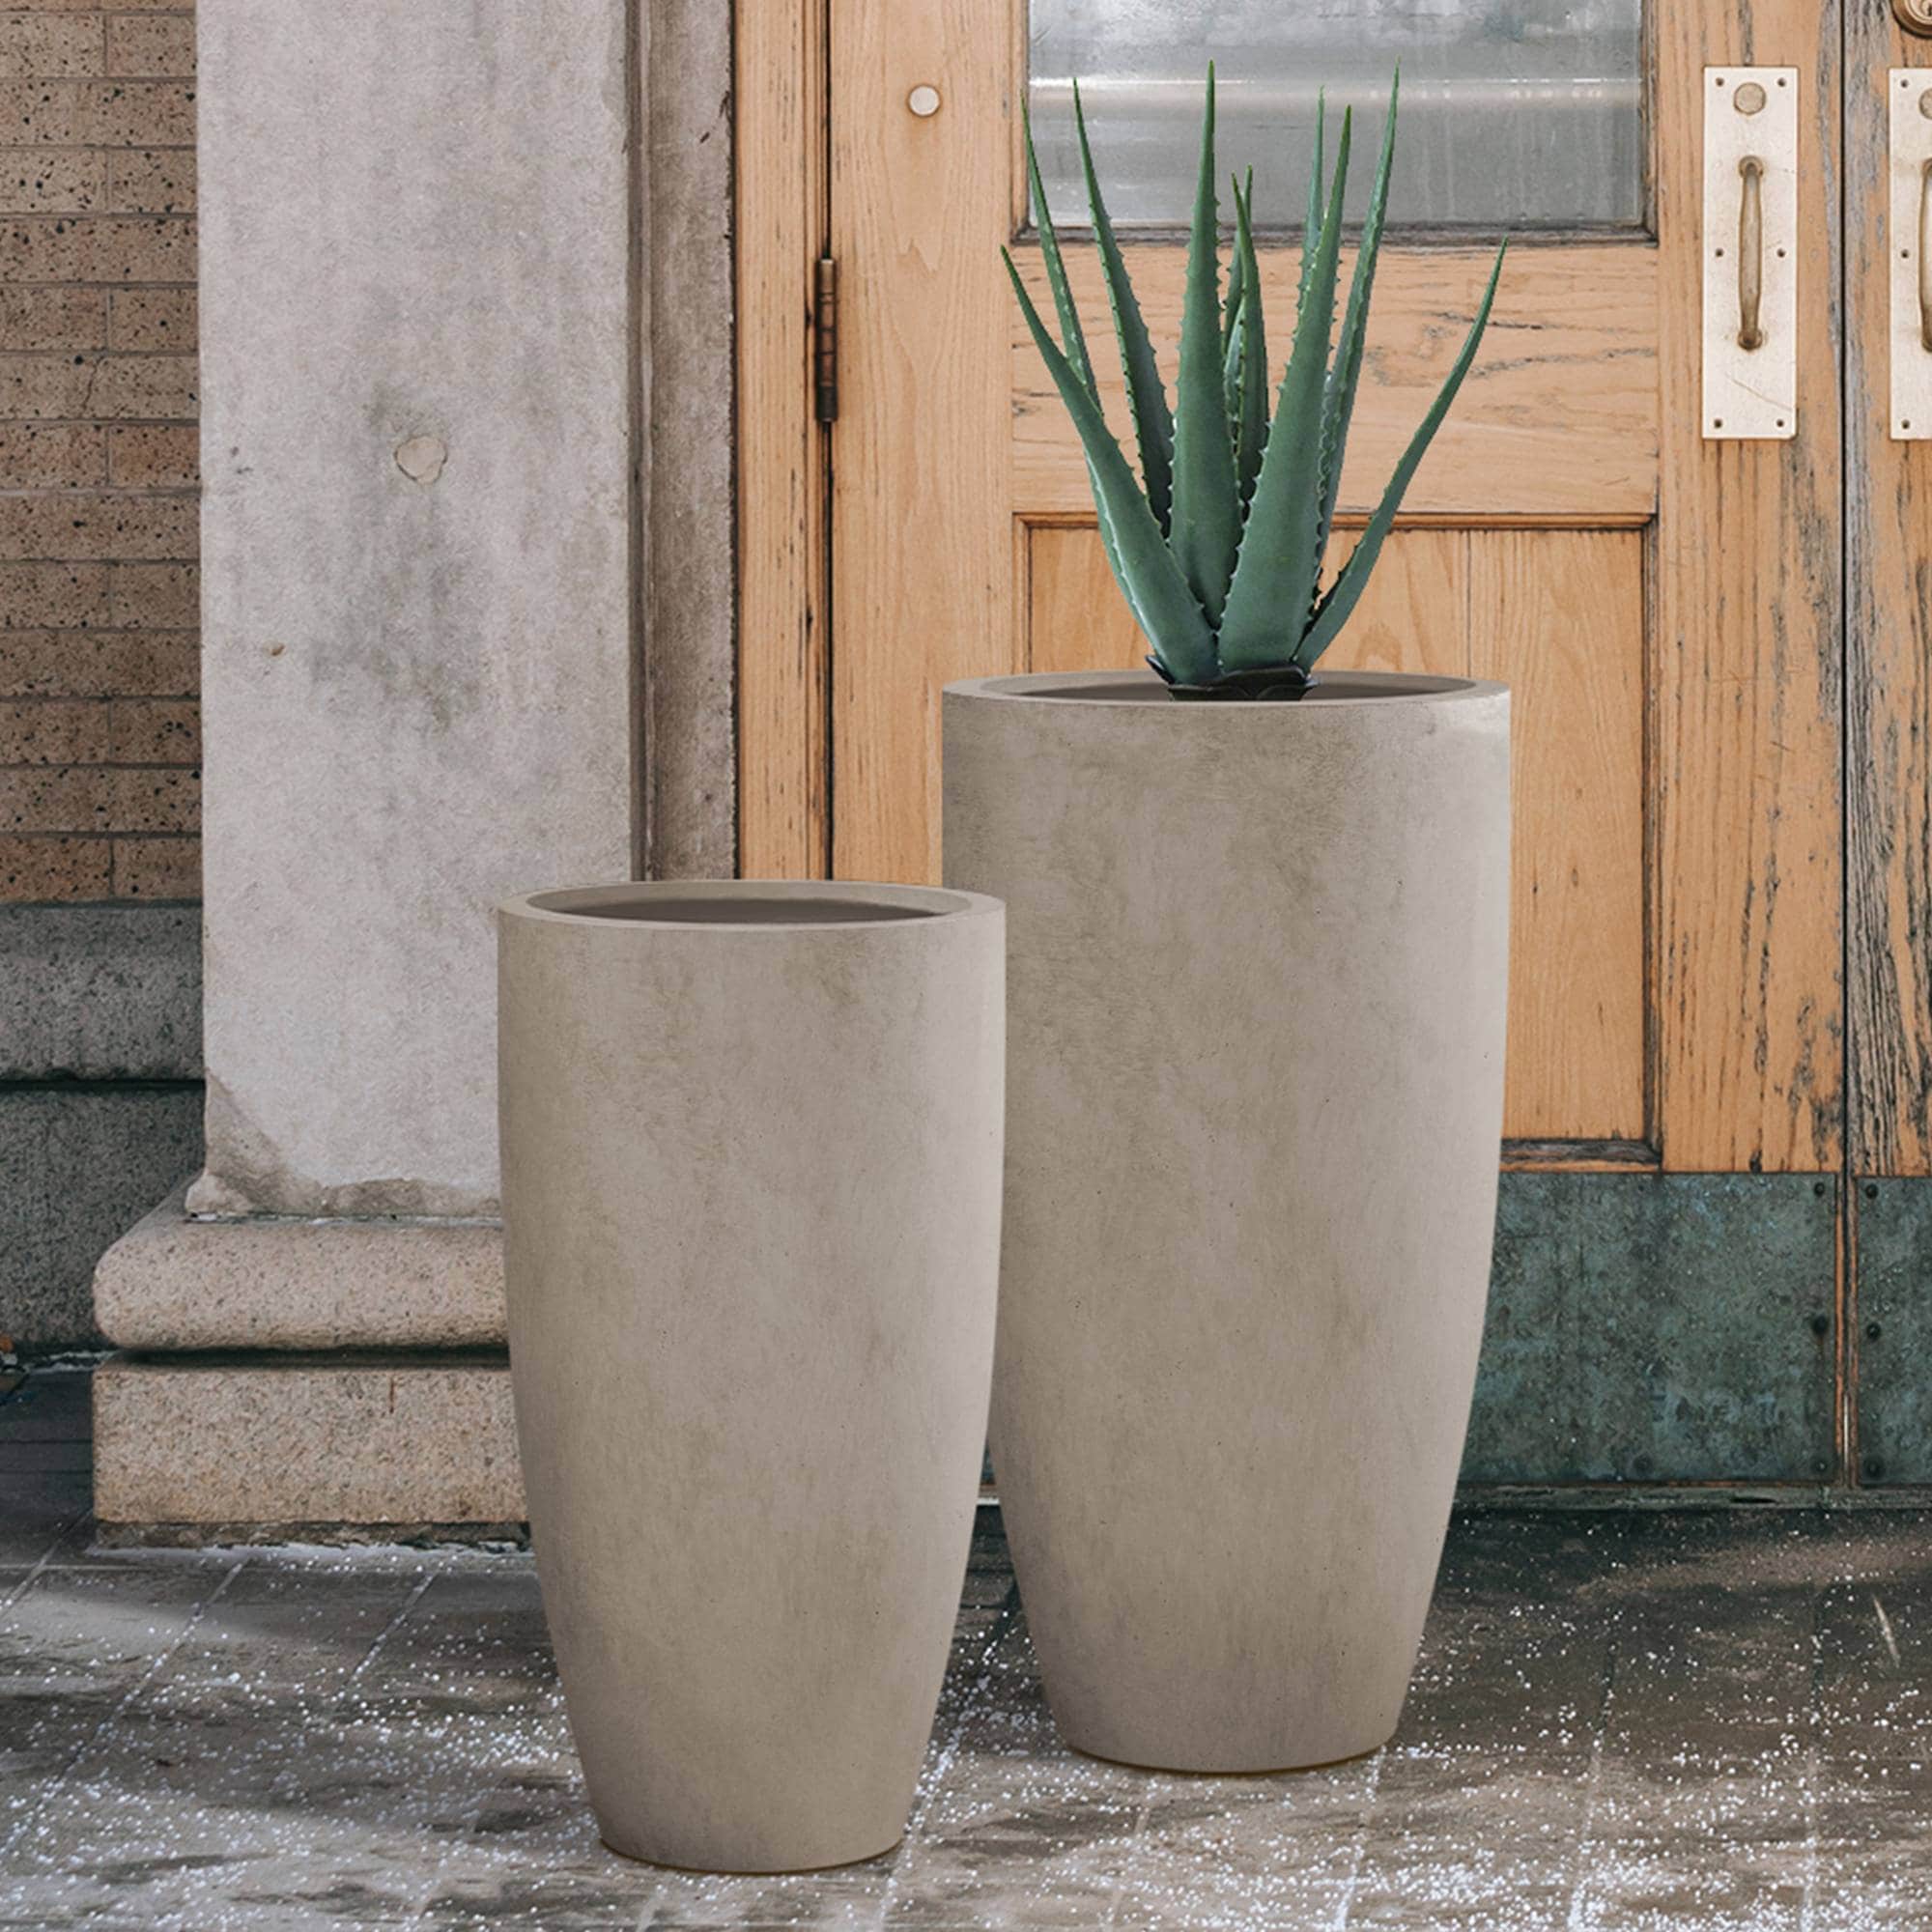 PLANTARA 14 in. D Round Concrete planter with Drainage Hole